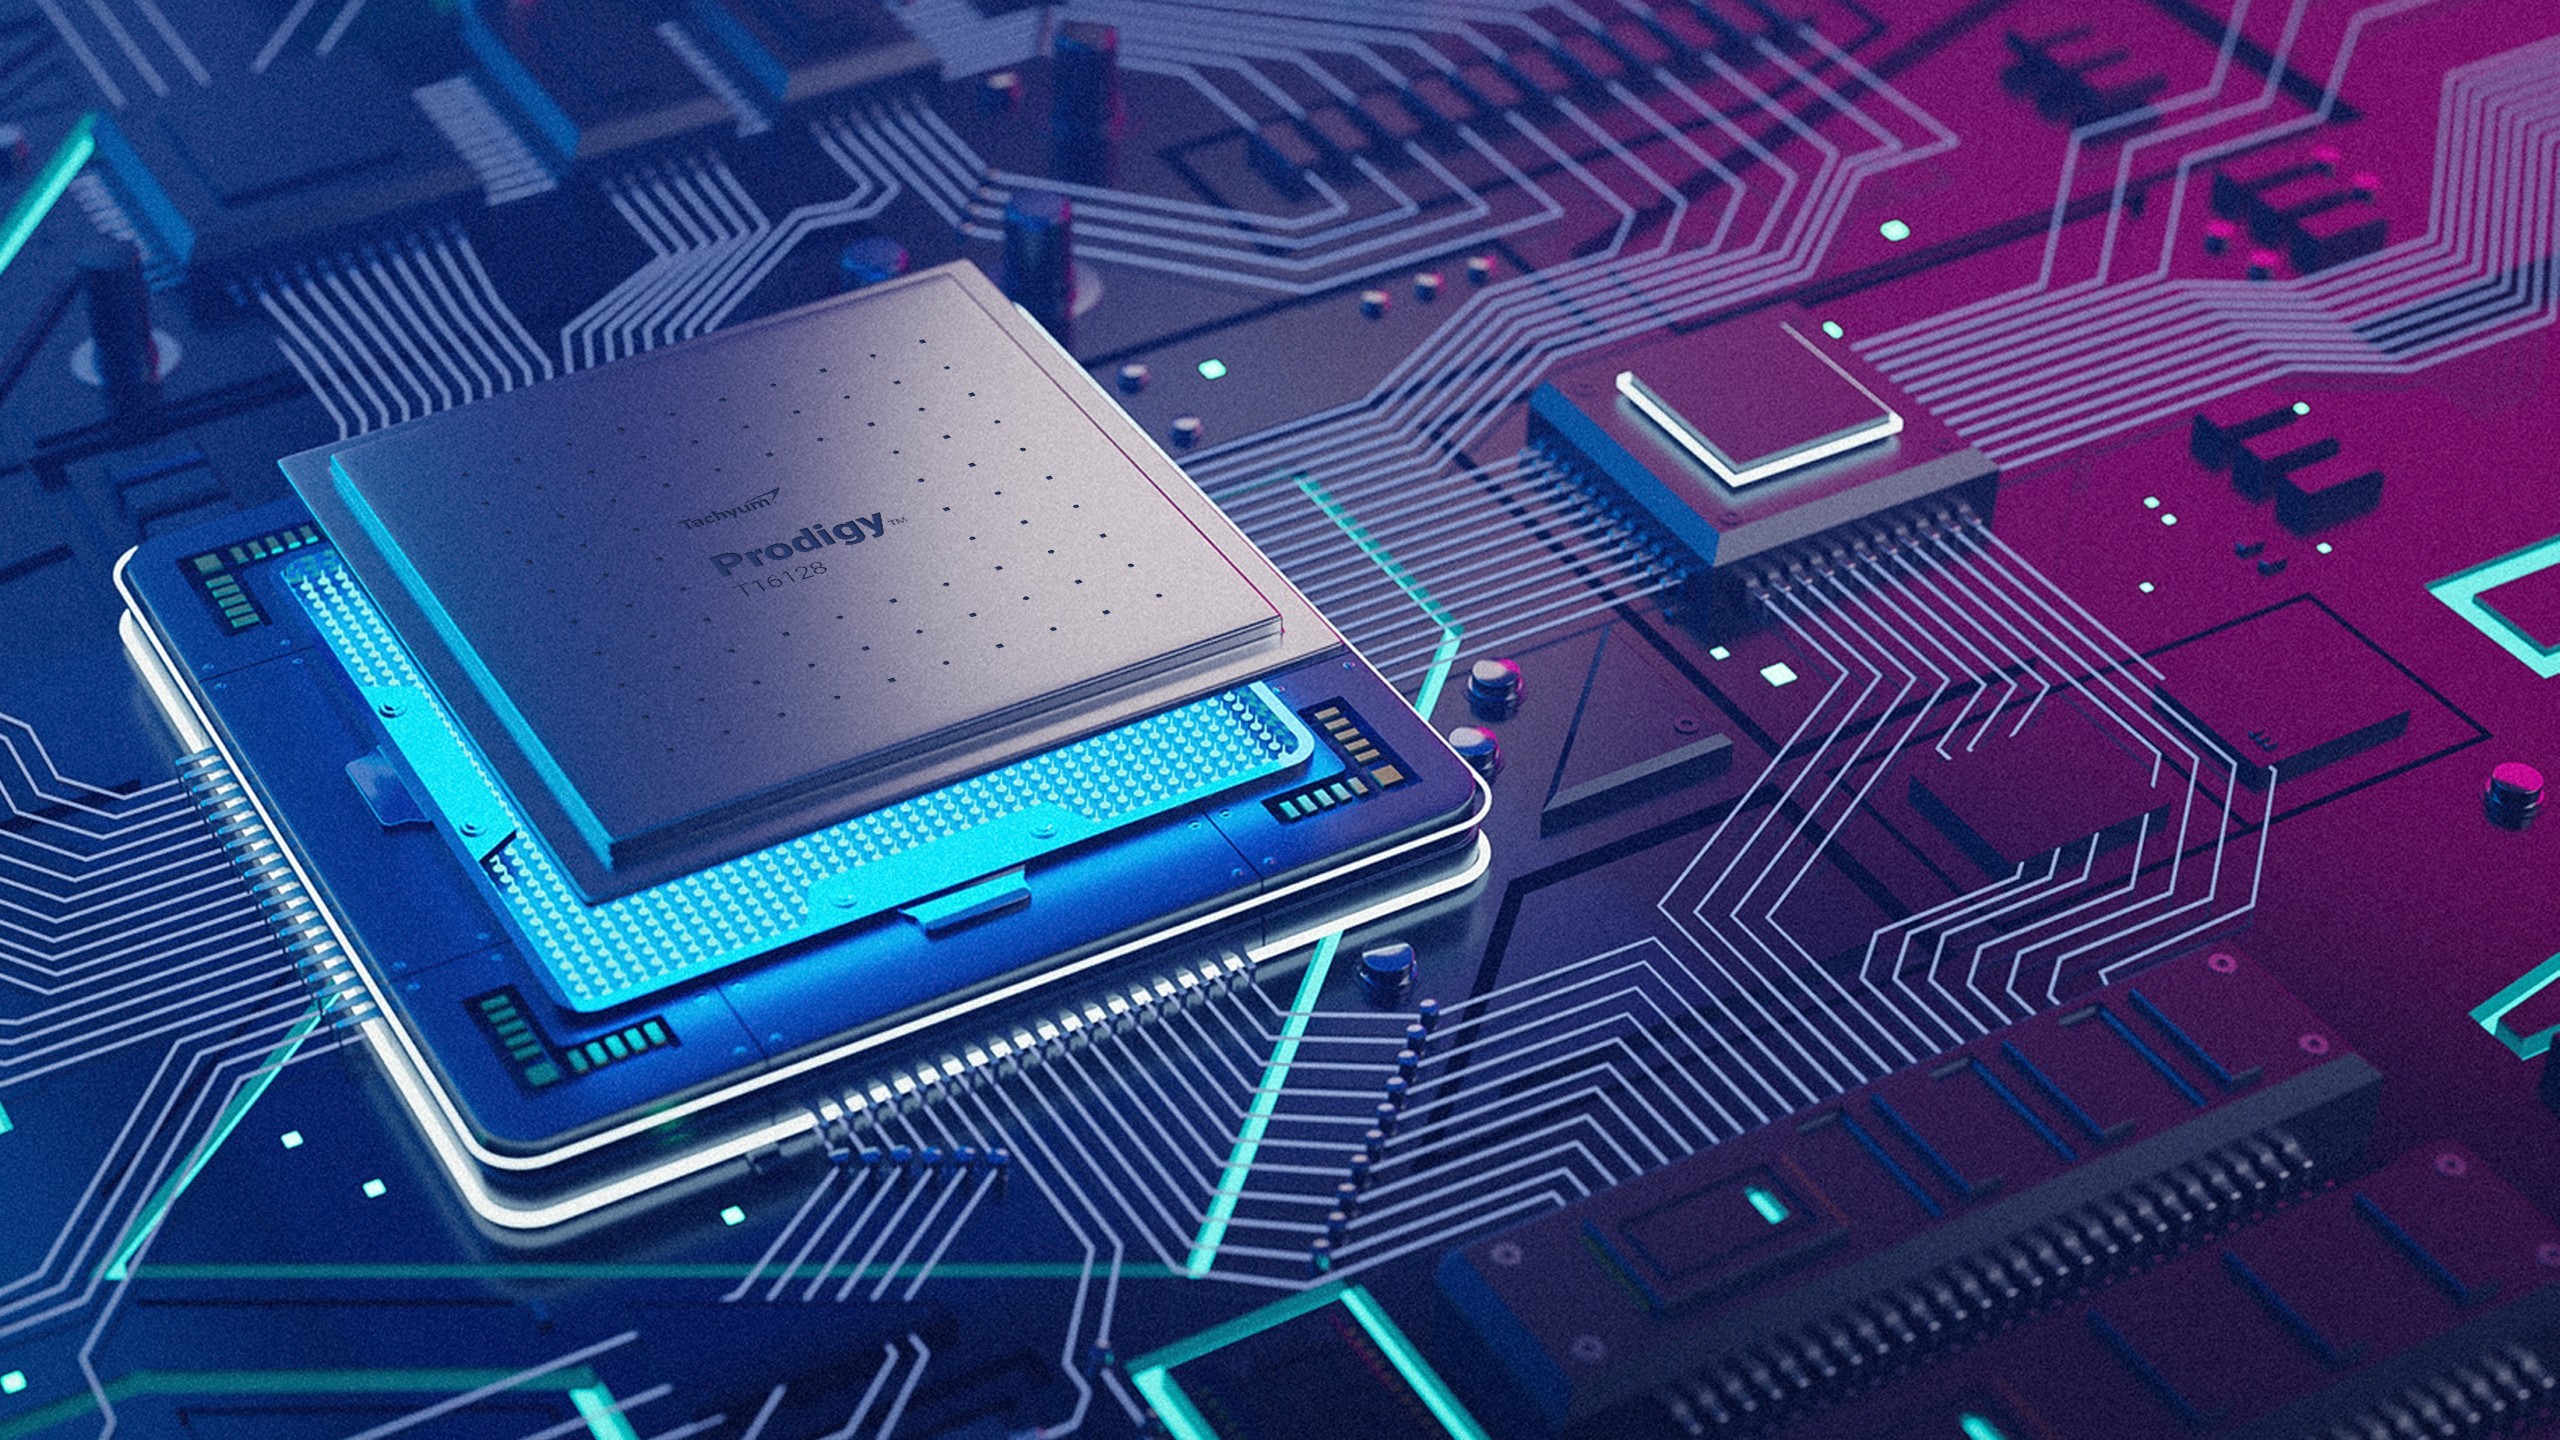 Tachyum unveils a monster processor that does everything